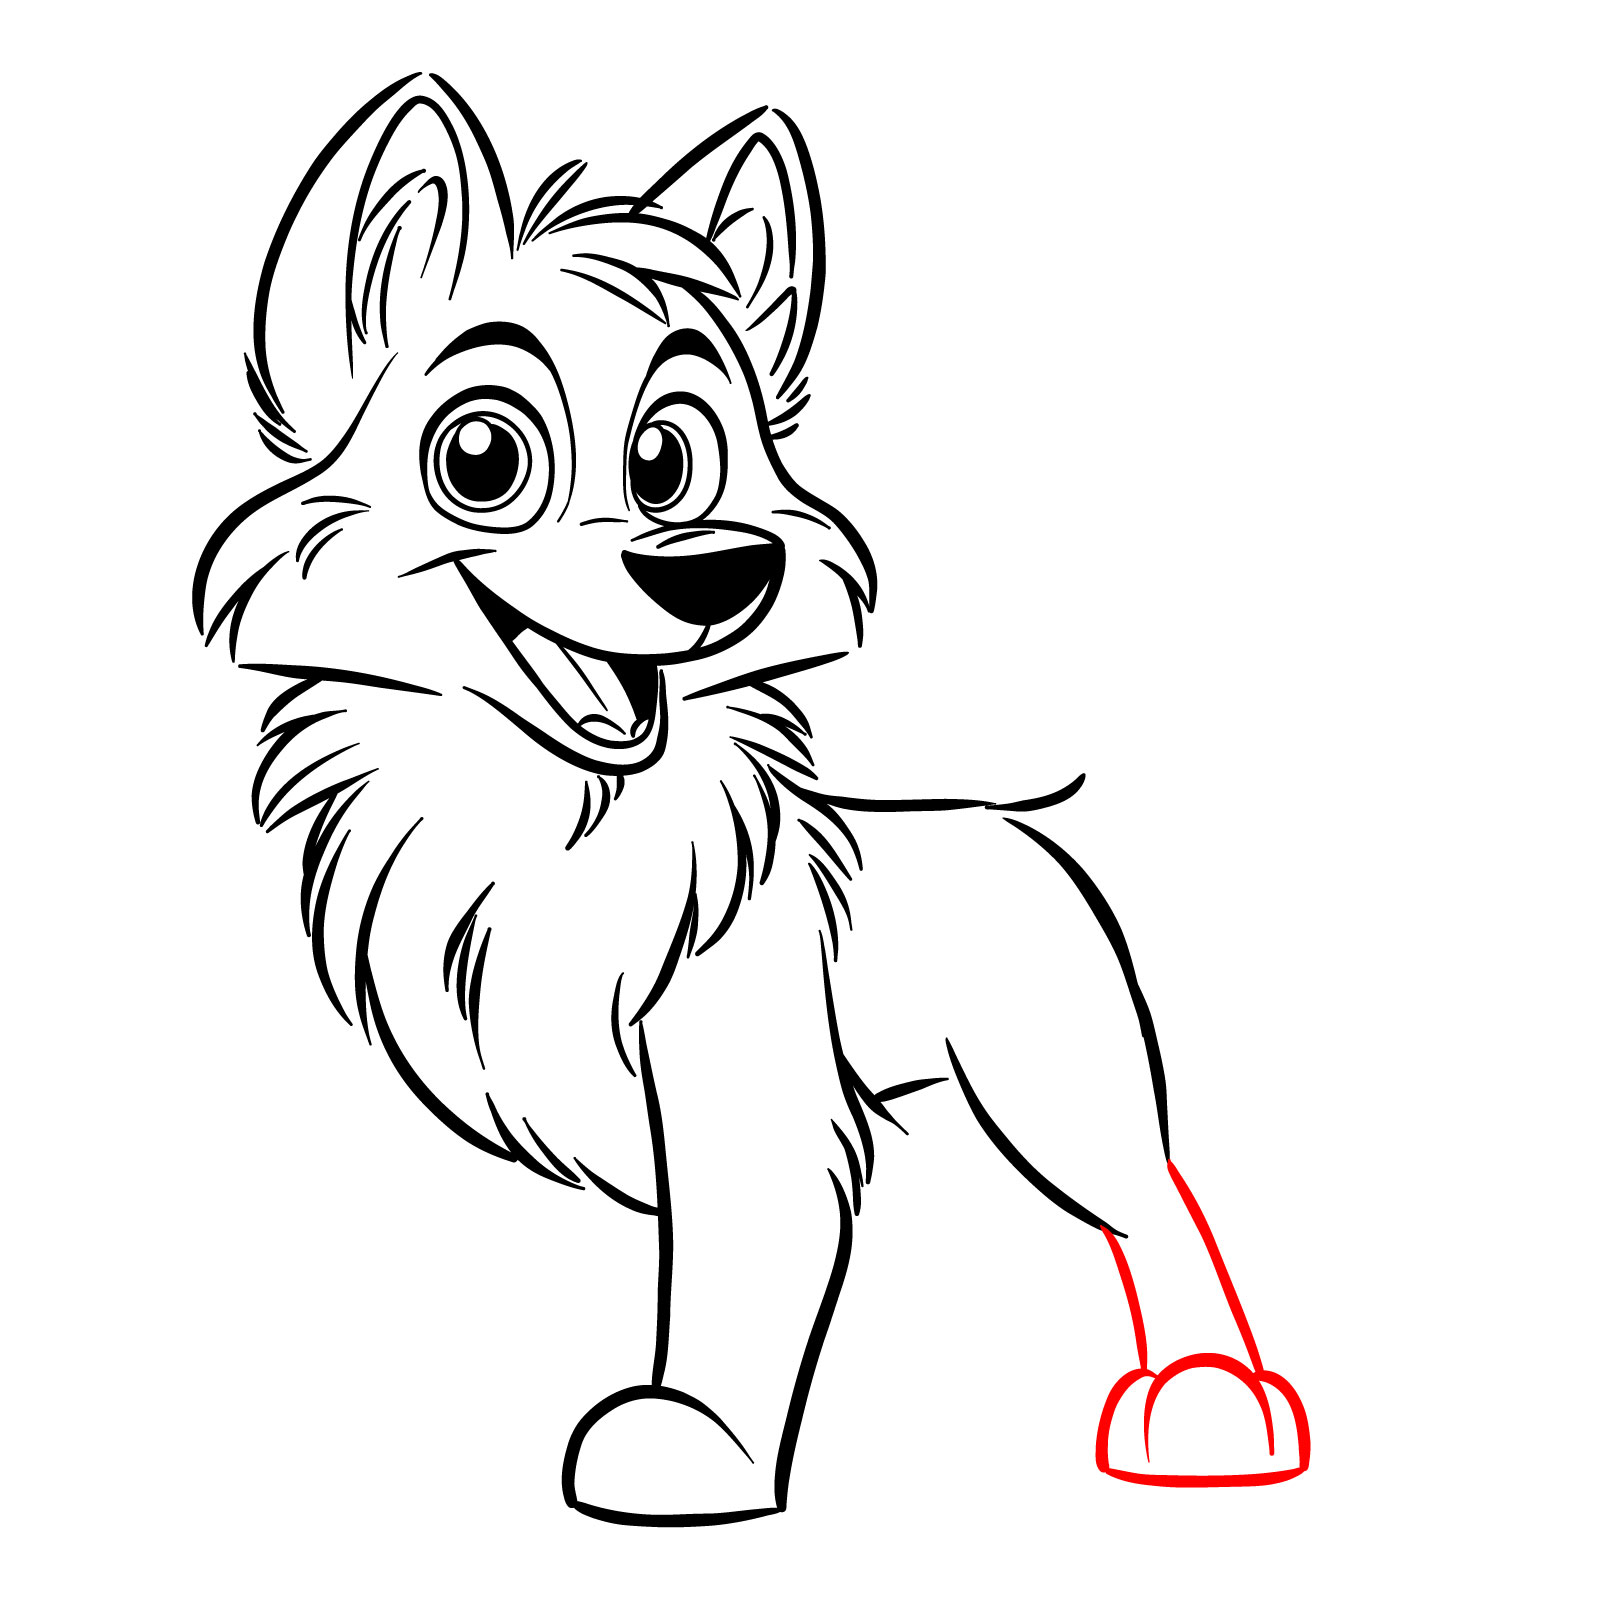 Finalizing the first rear leg and paw in a cartoon wolf drawing - step 13